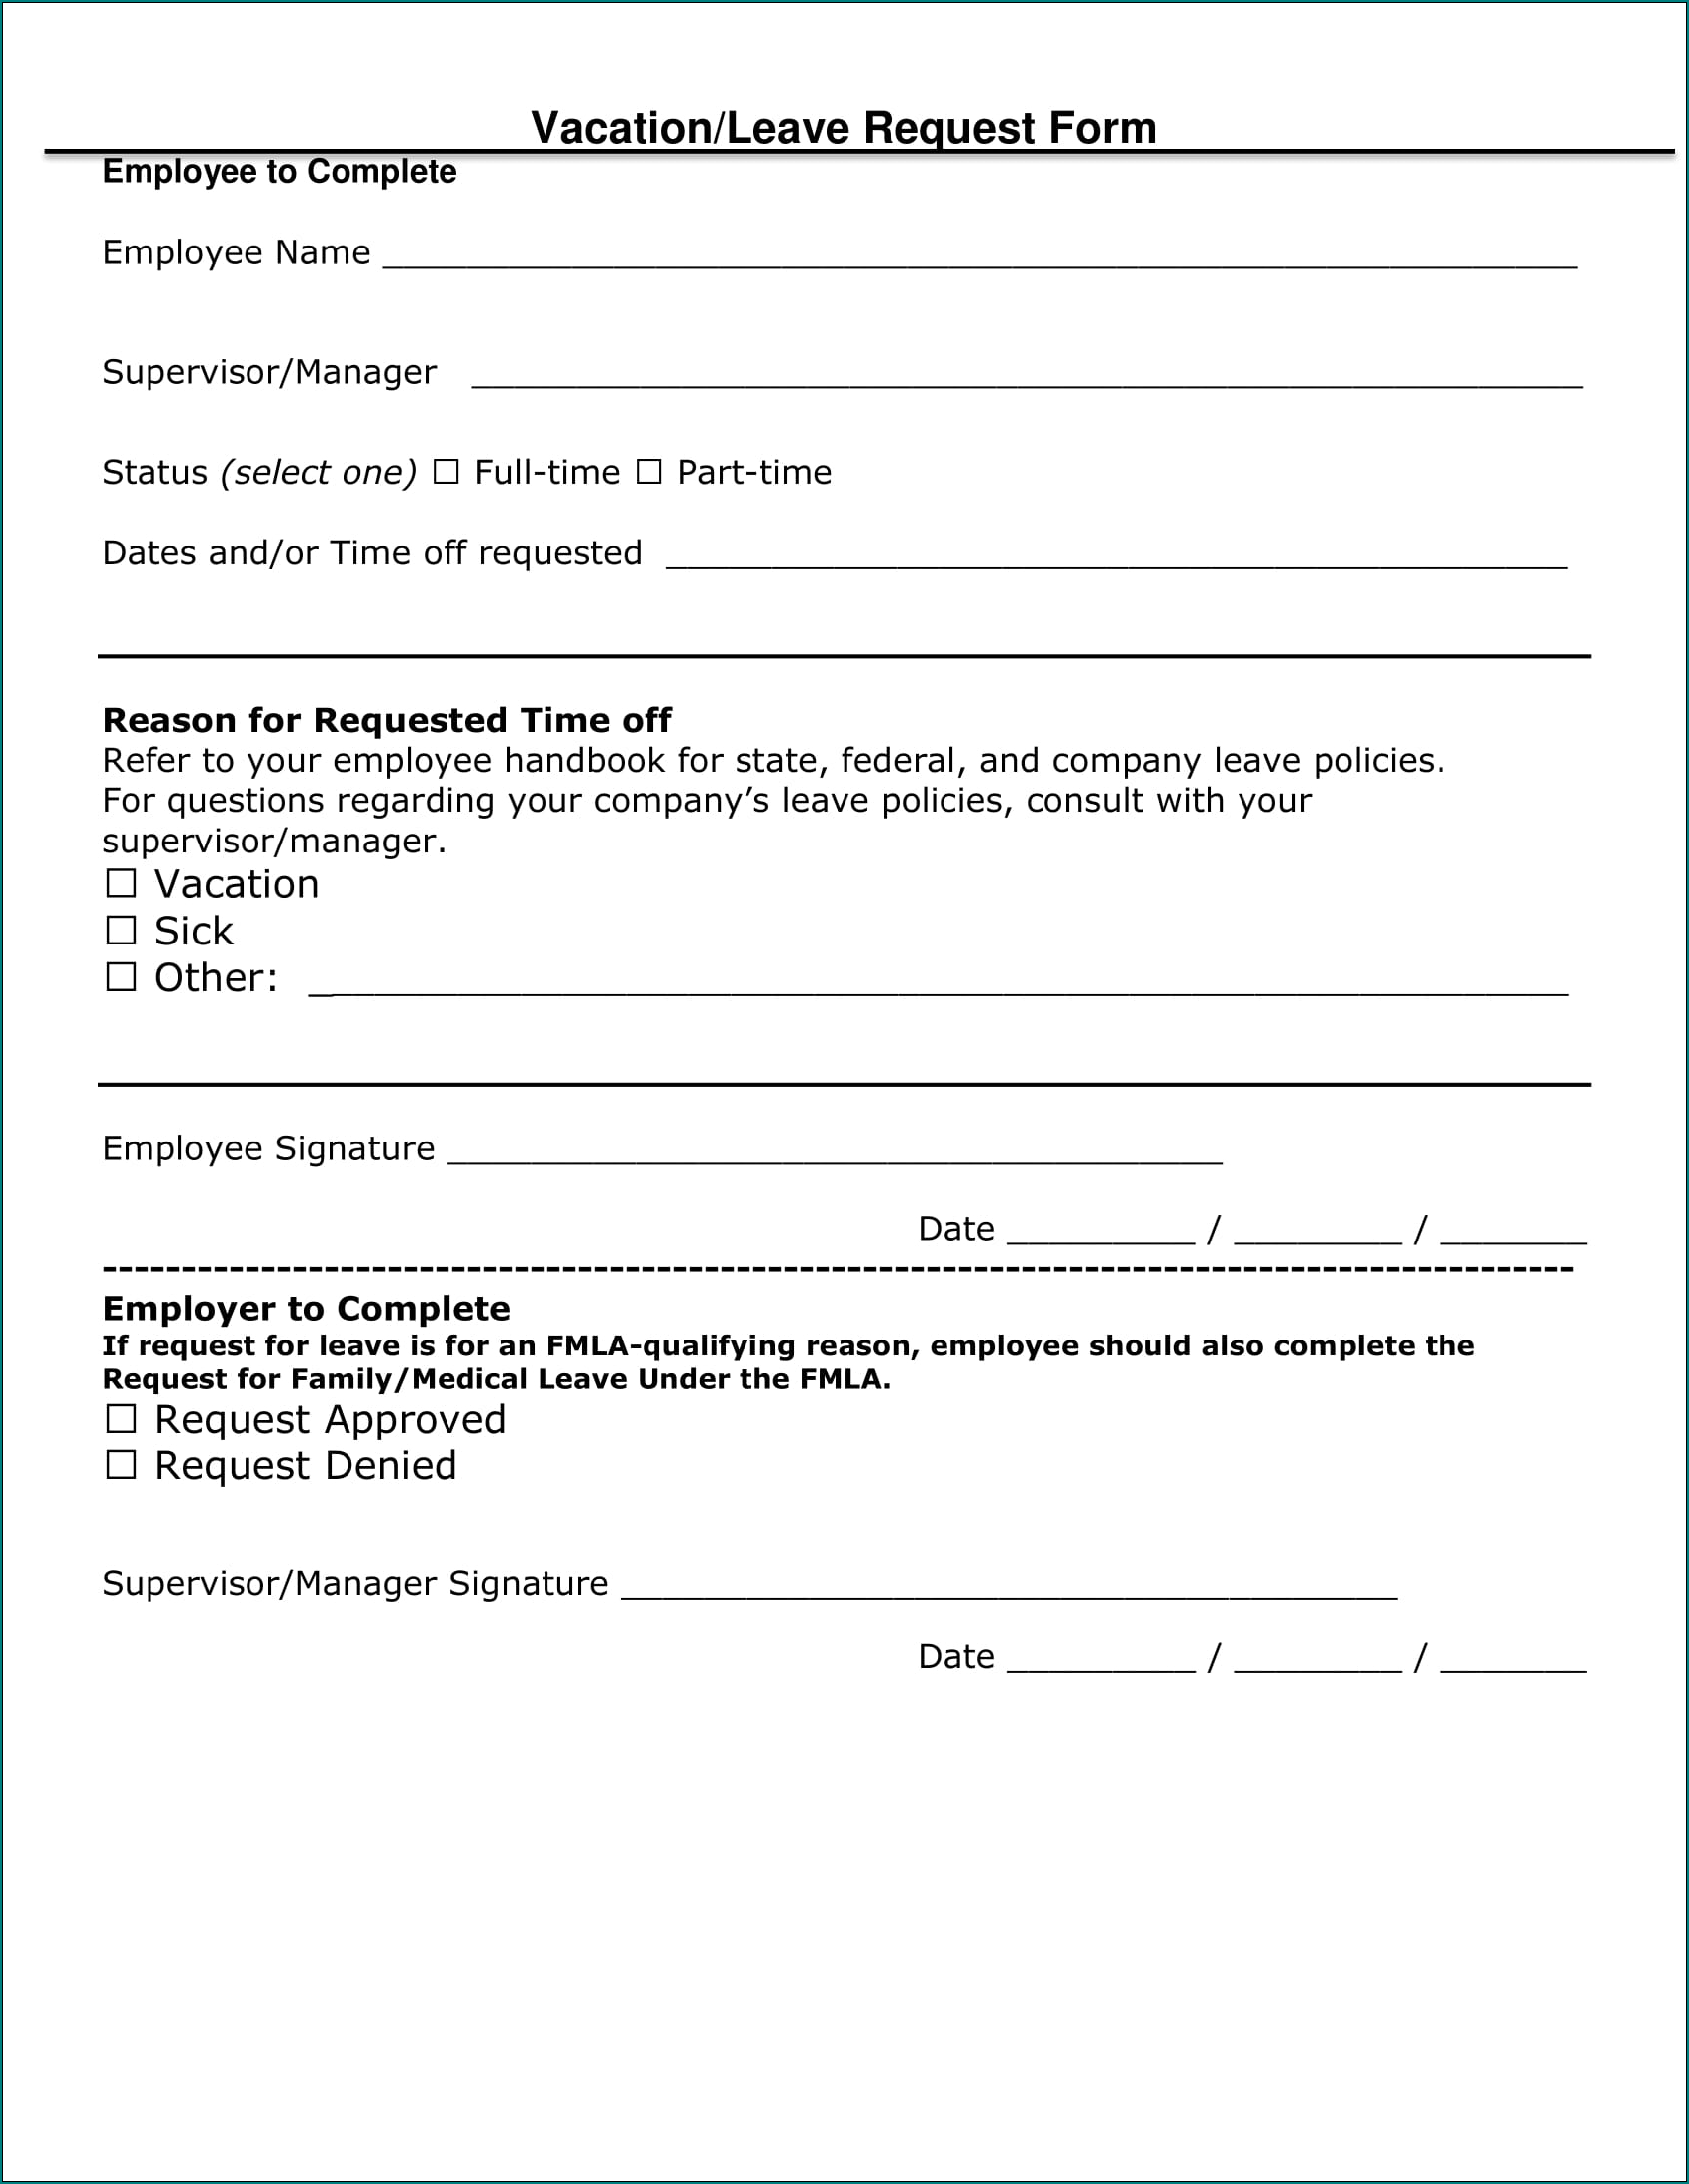 Sample of Vacation Request Form